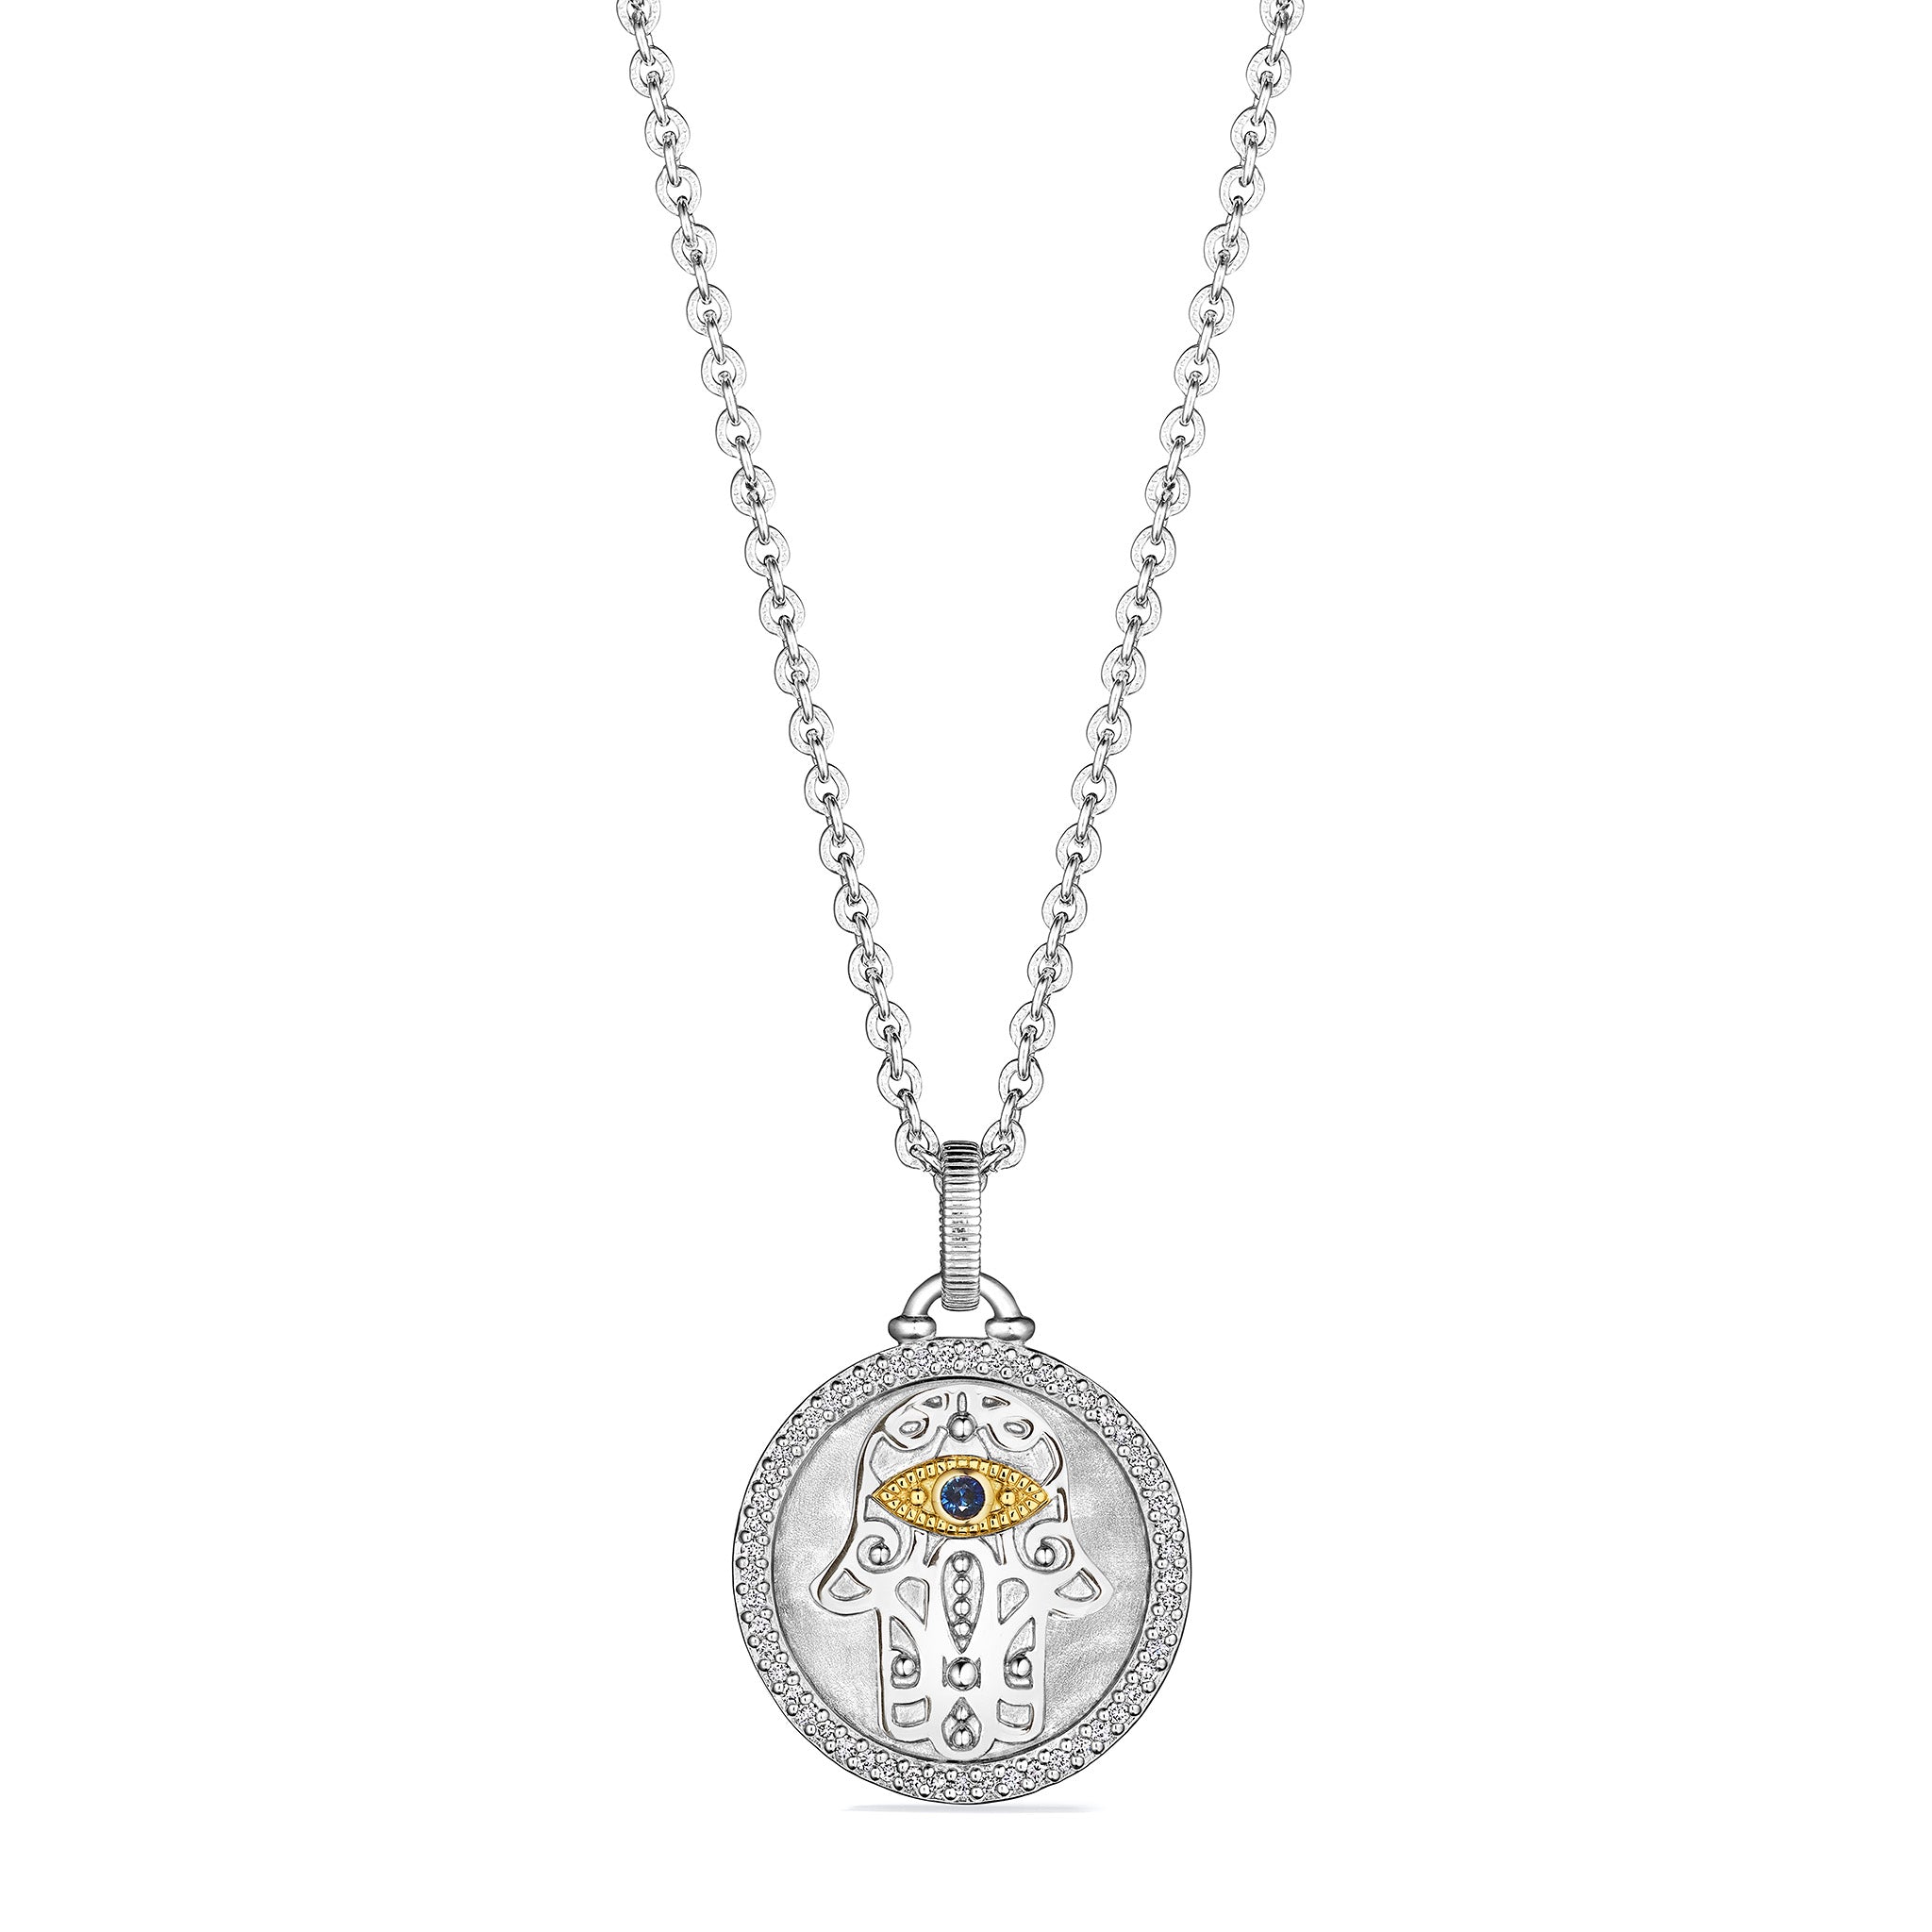 Little Luxuries Hamsa Medallion Necklace With Blue Sapphire, Diamonds And 18K Gold